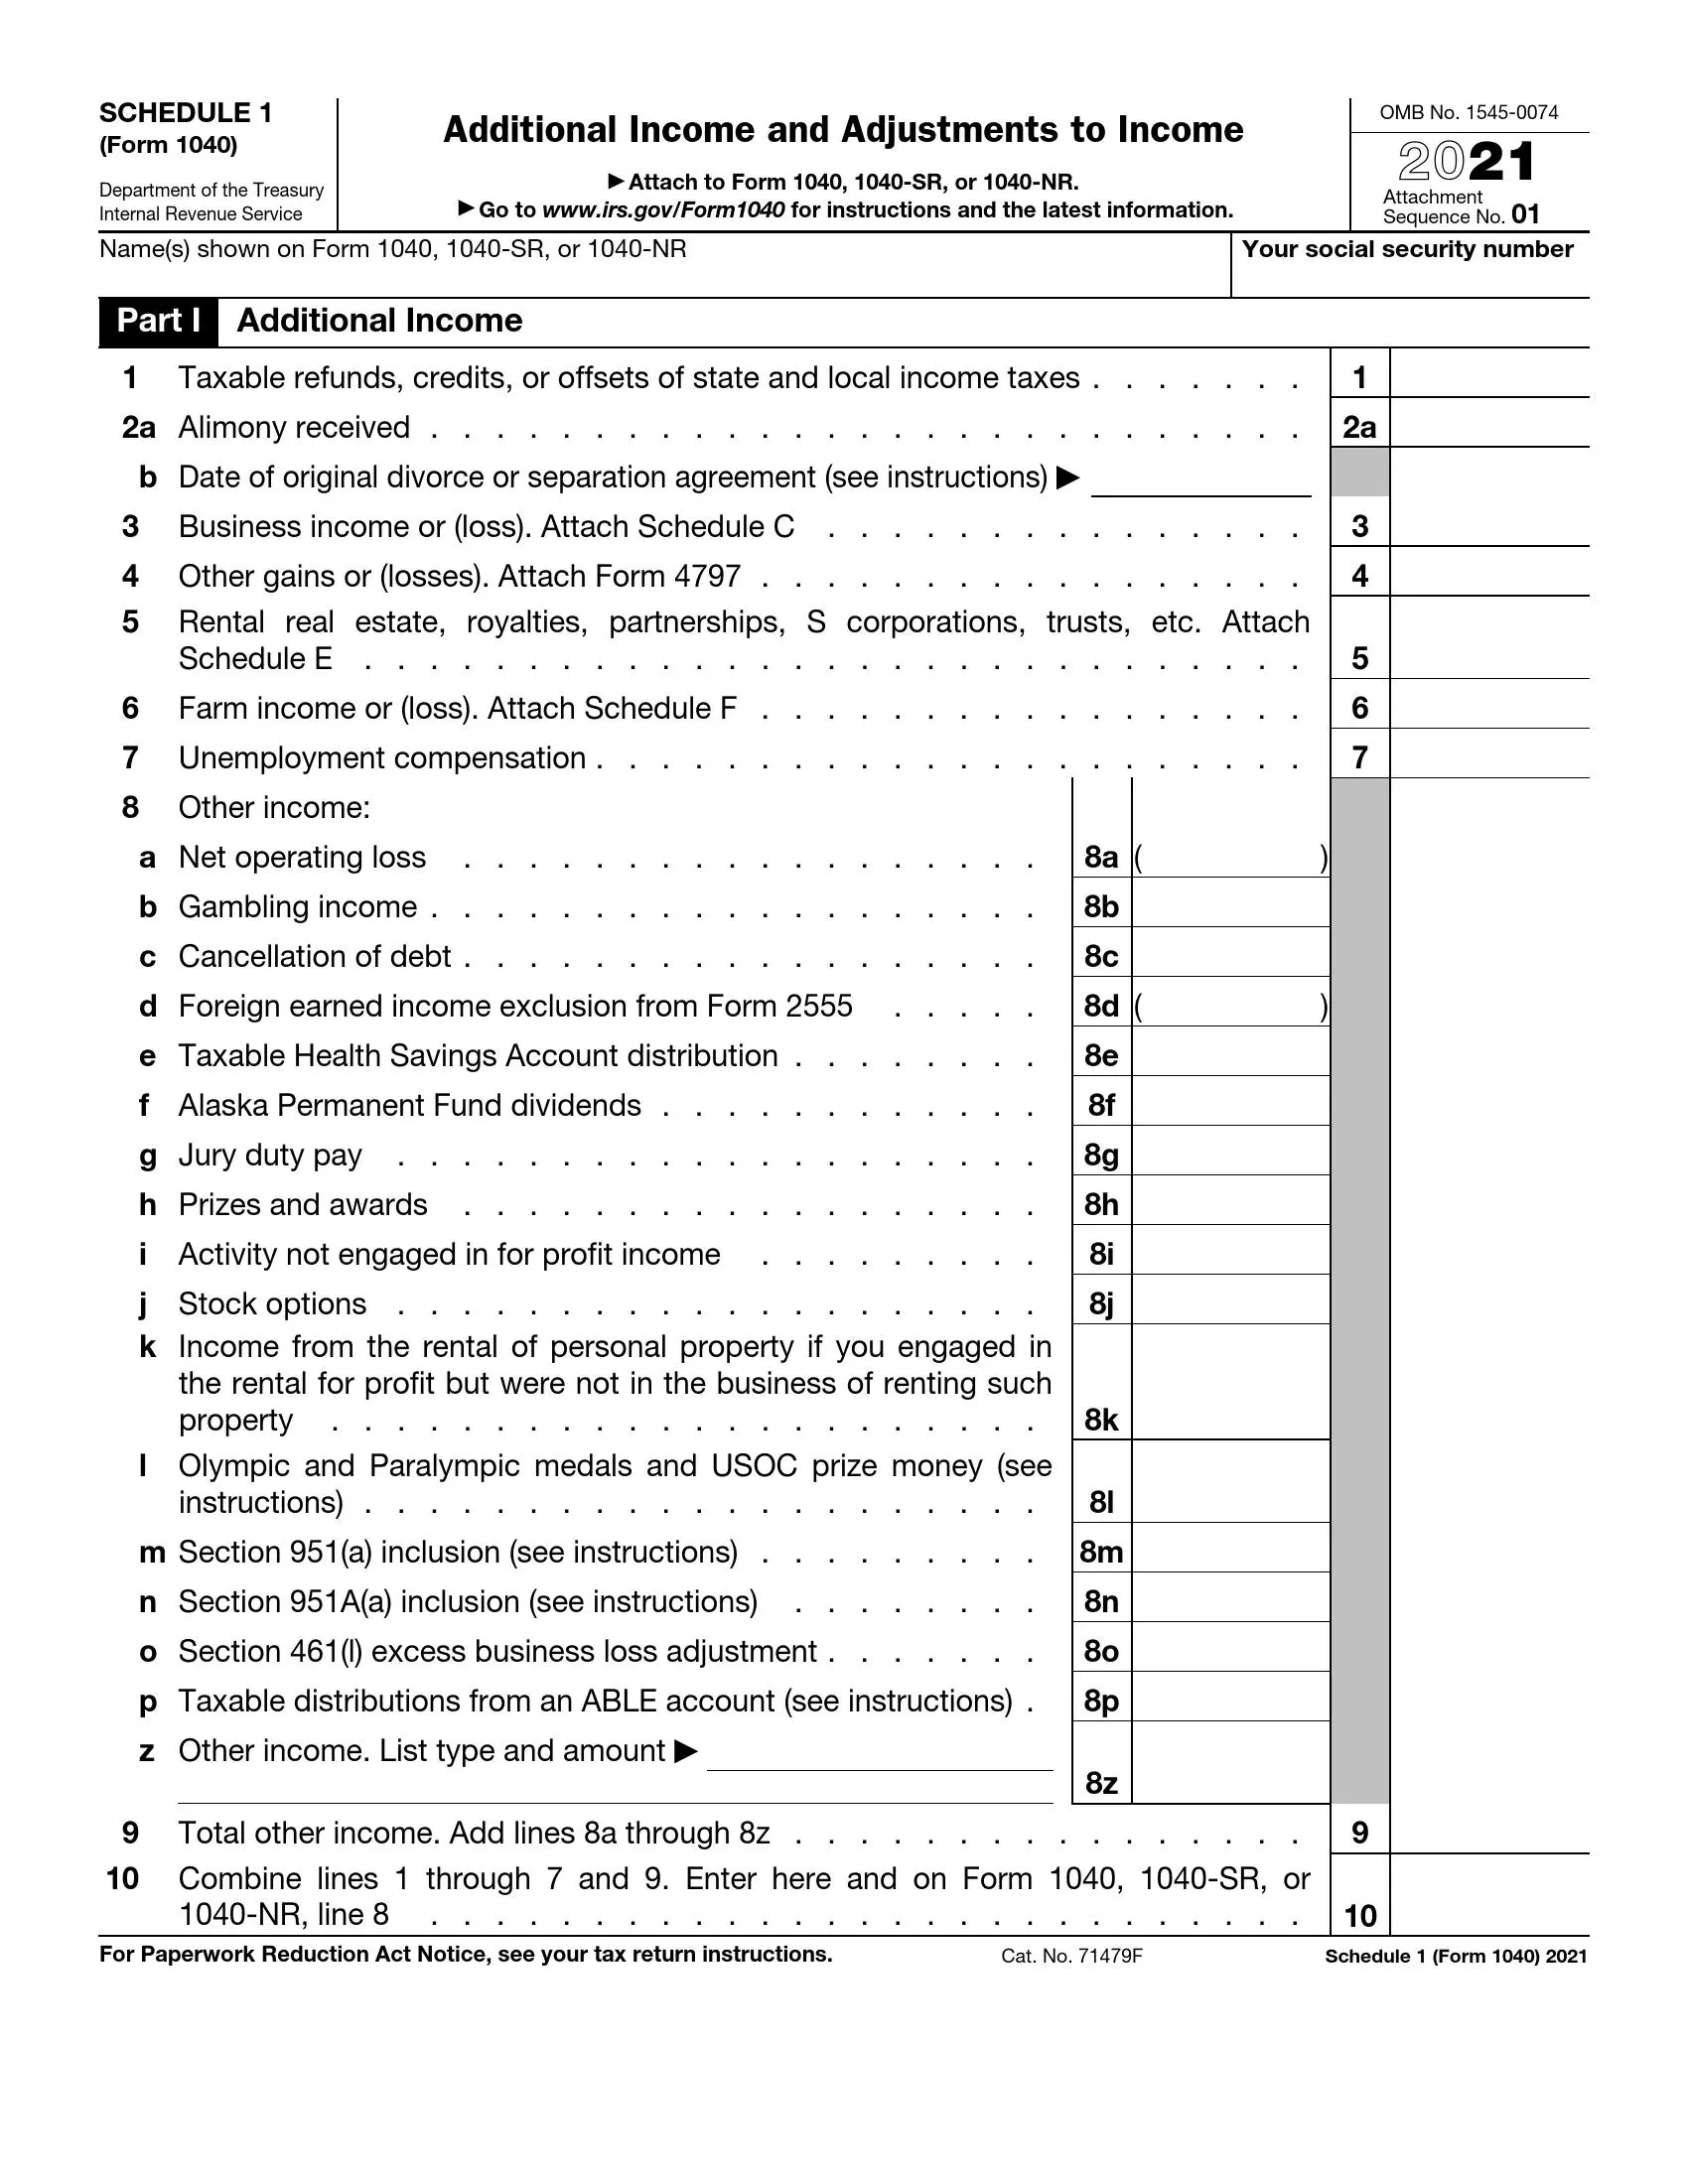 Irs Forms 2022 Schedule 1 Irs Schedule 1 Form 1040 Or 1040-Sr ≡ Fill Out Pdf Forms Online